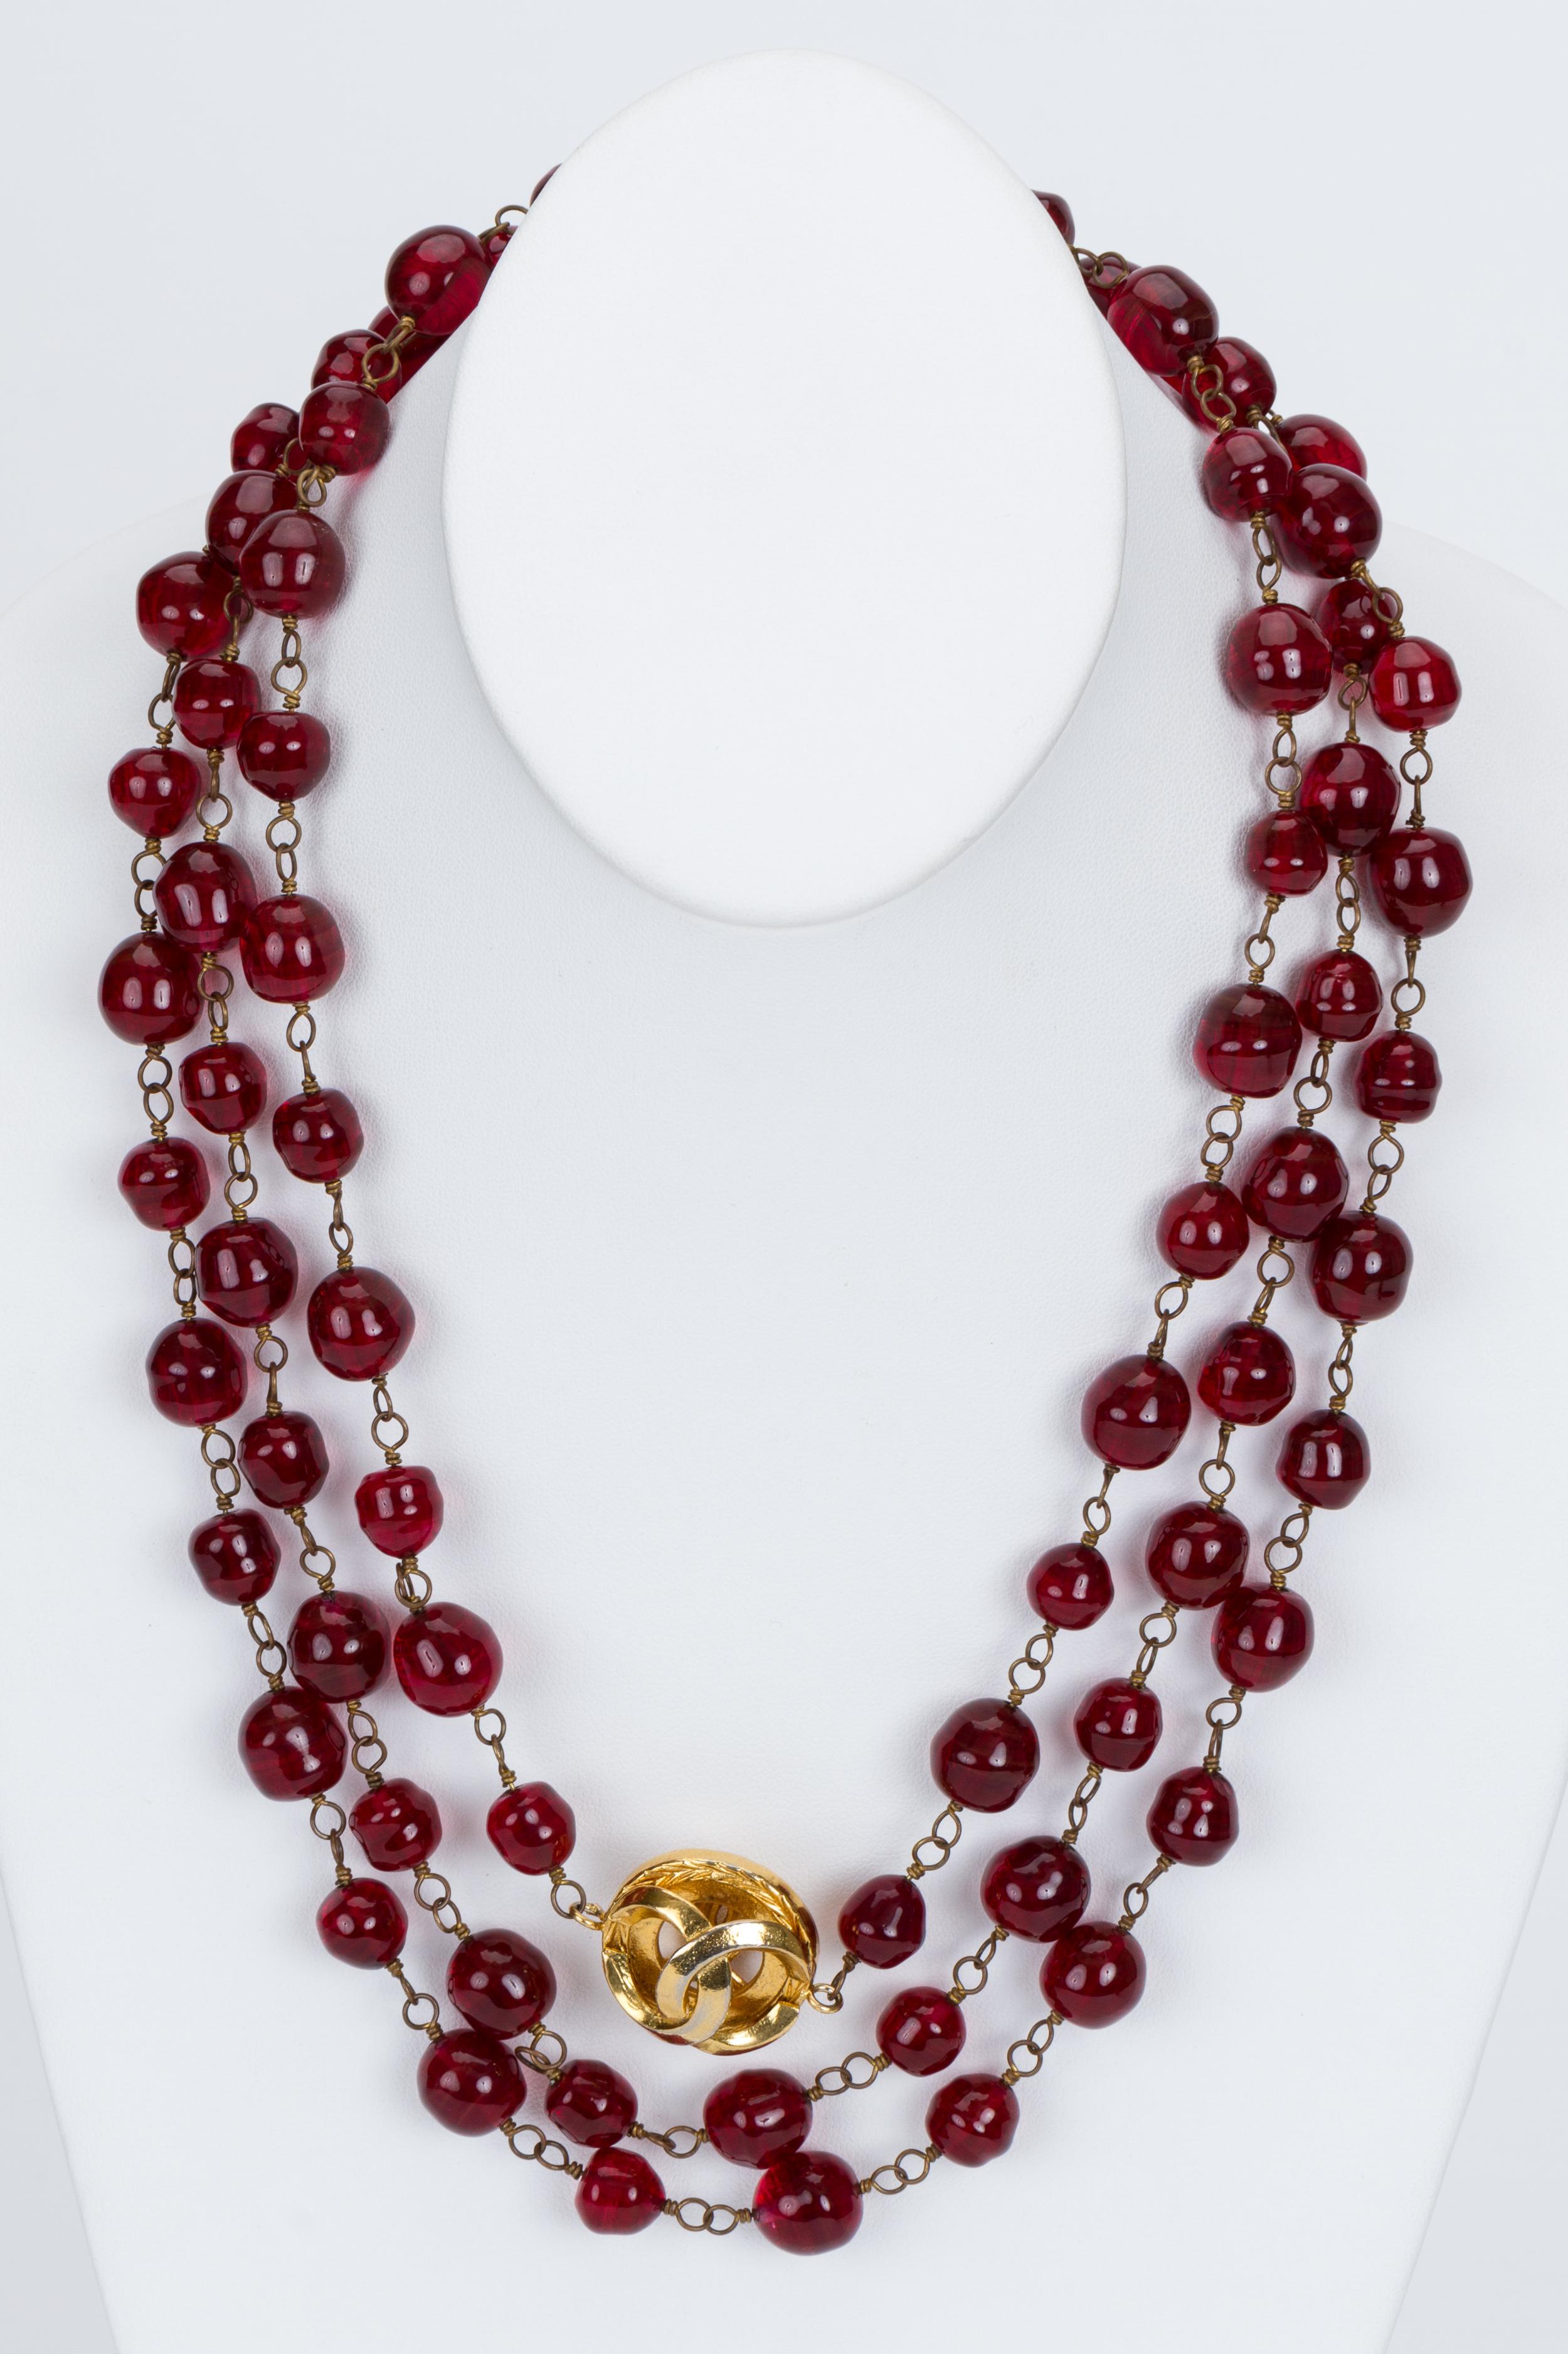 Chanel extra long red gripoix (poured glass) sautoir necklace. Can be worn up to 4 strands. 70s collection. Comes with original box.